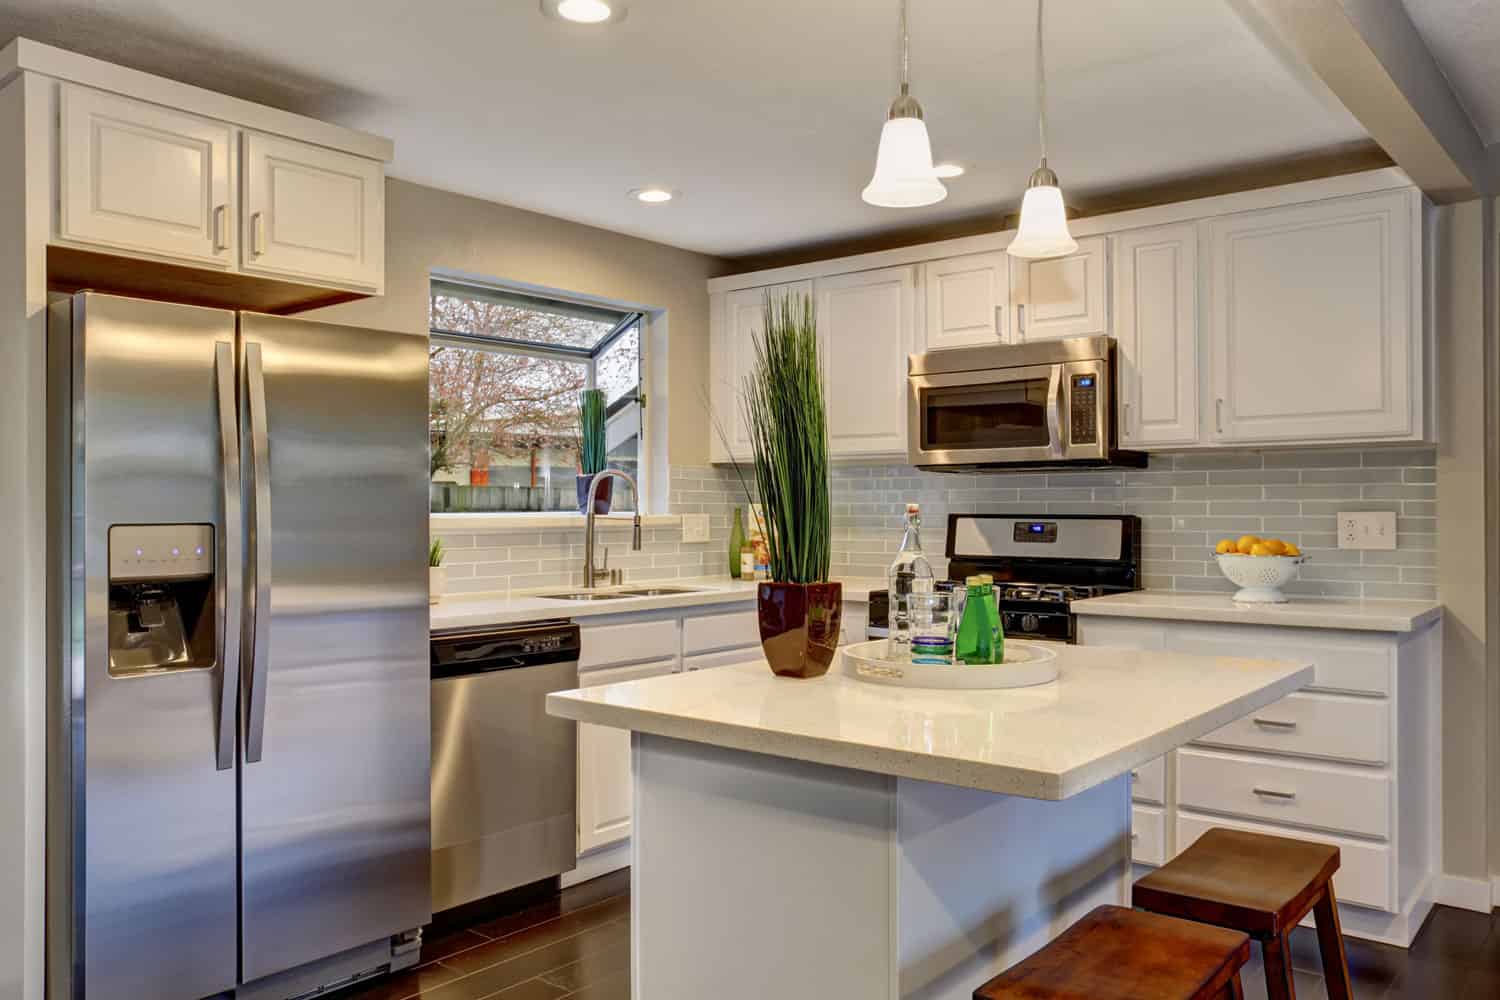 A spacious kitchen with a breakfast bar dangling lamps and a refrigerator on the corner, Do Refrigerators Have Wheels?